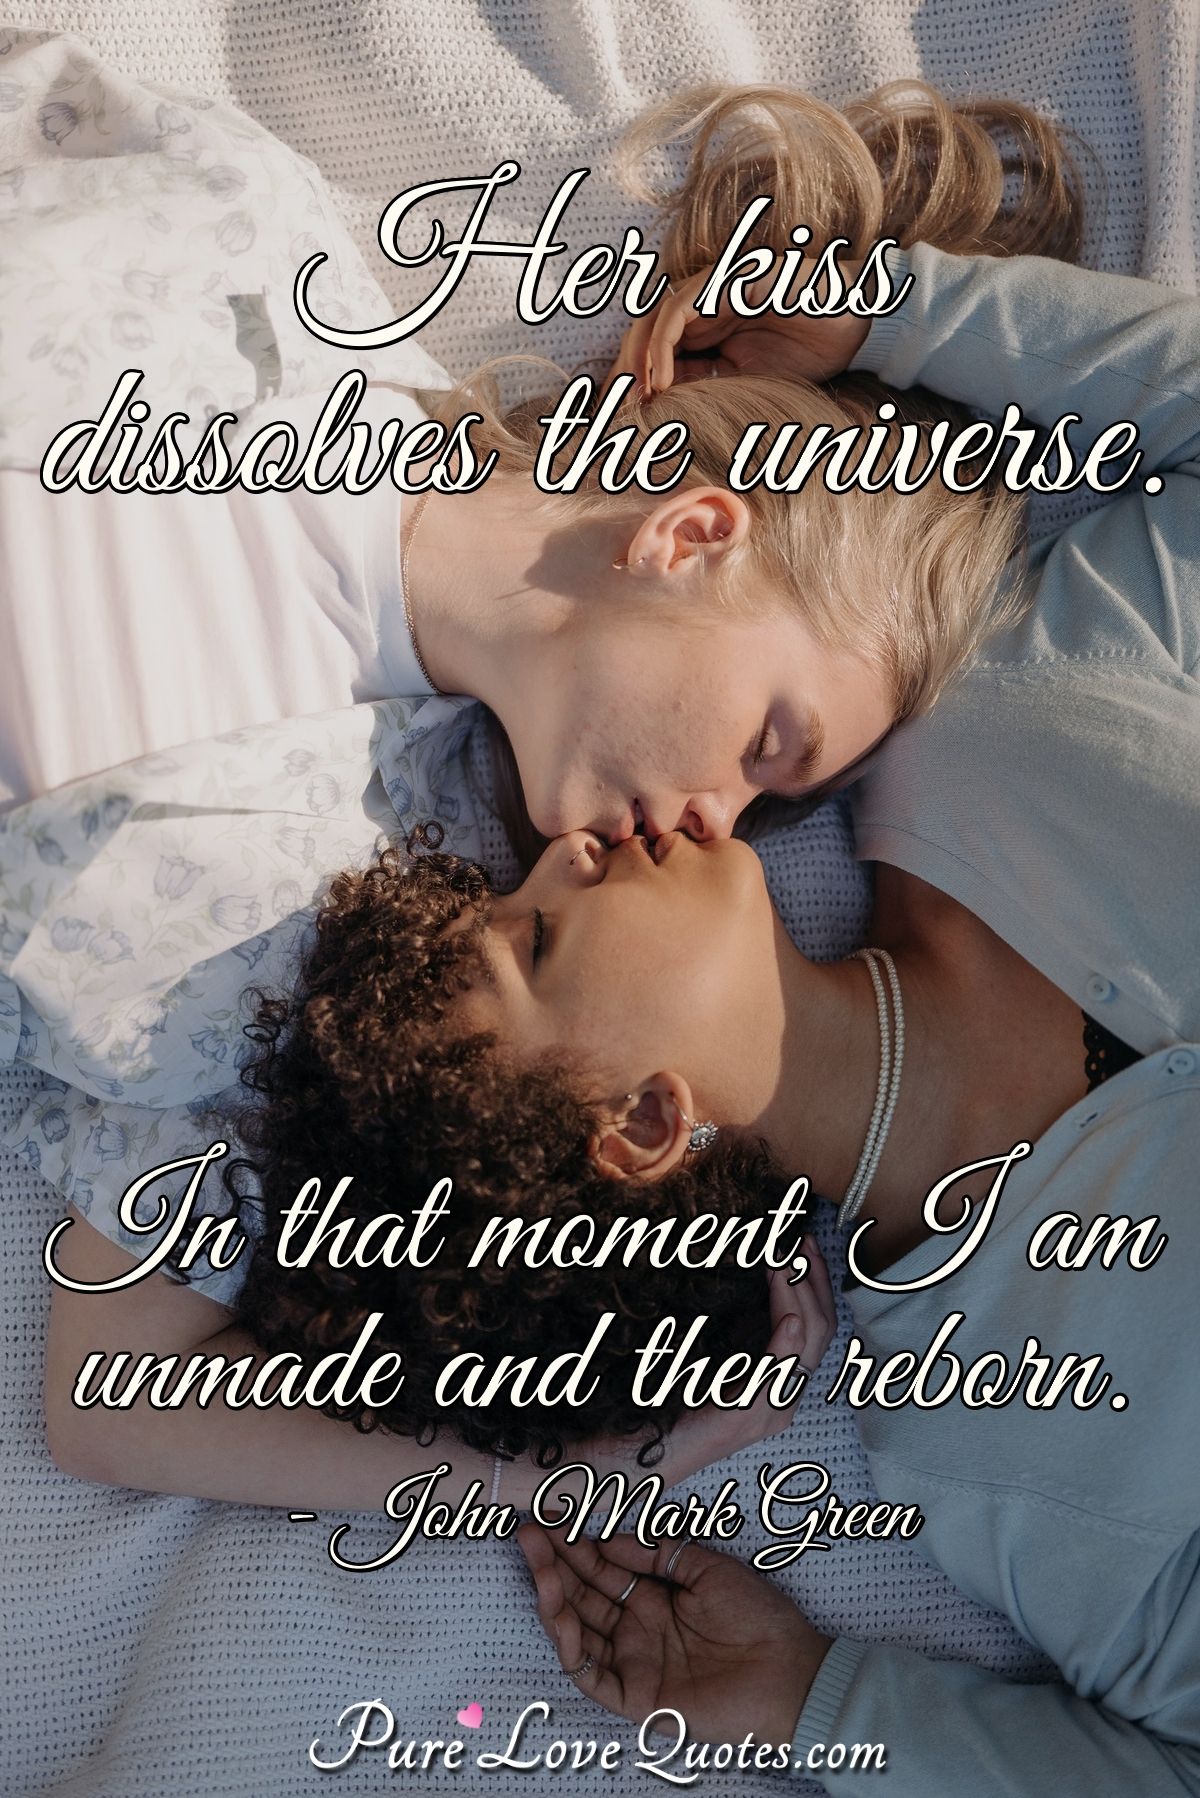 Her kiss dissolves the universe. In that moment, I am unmade and then reborn. - John Mark Green